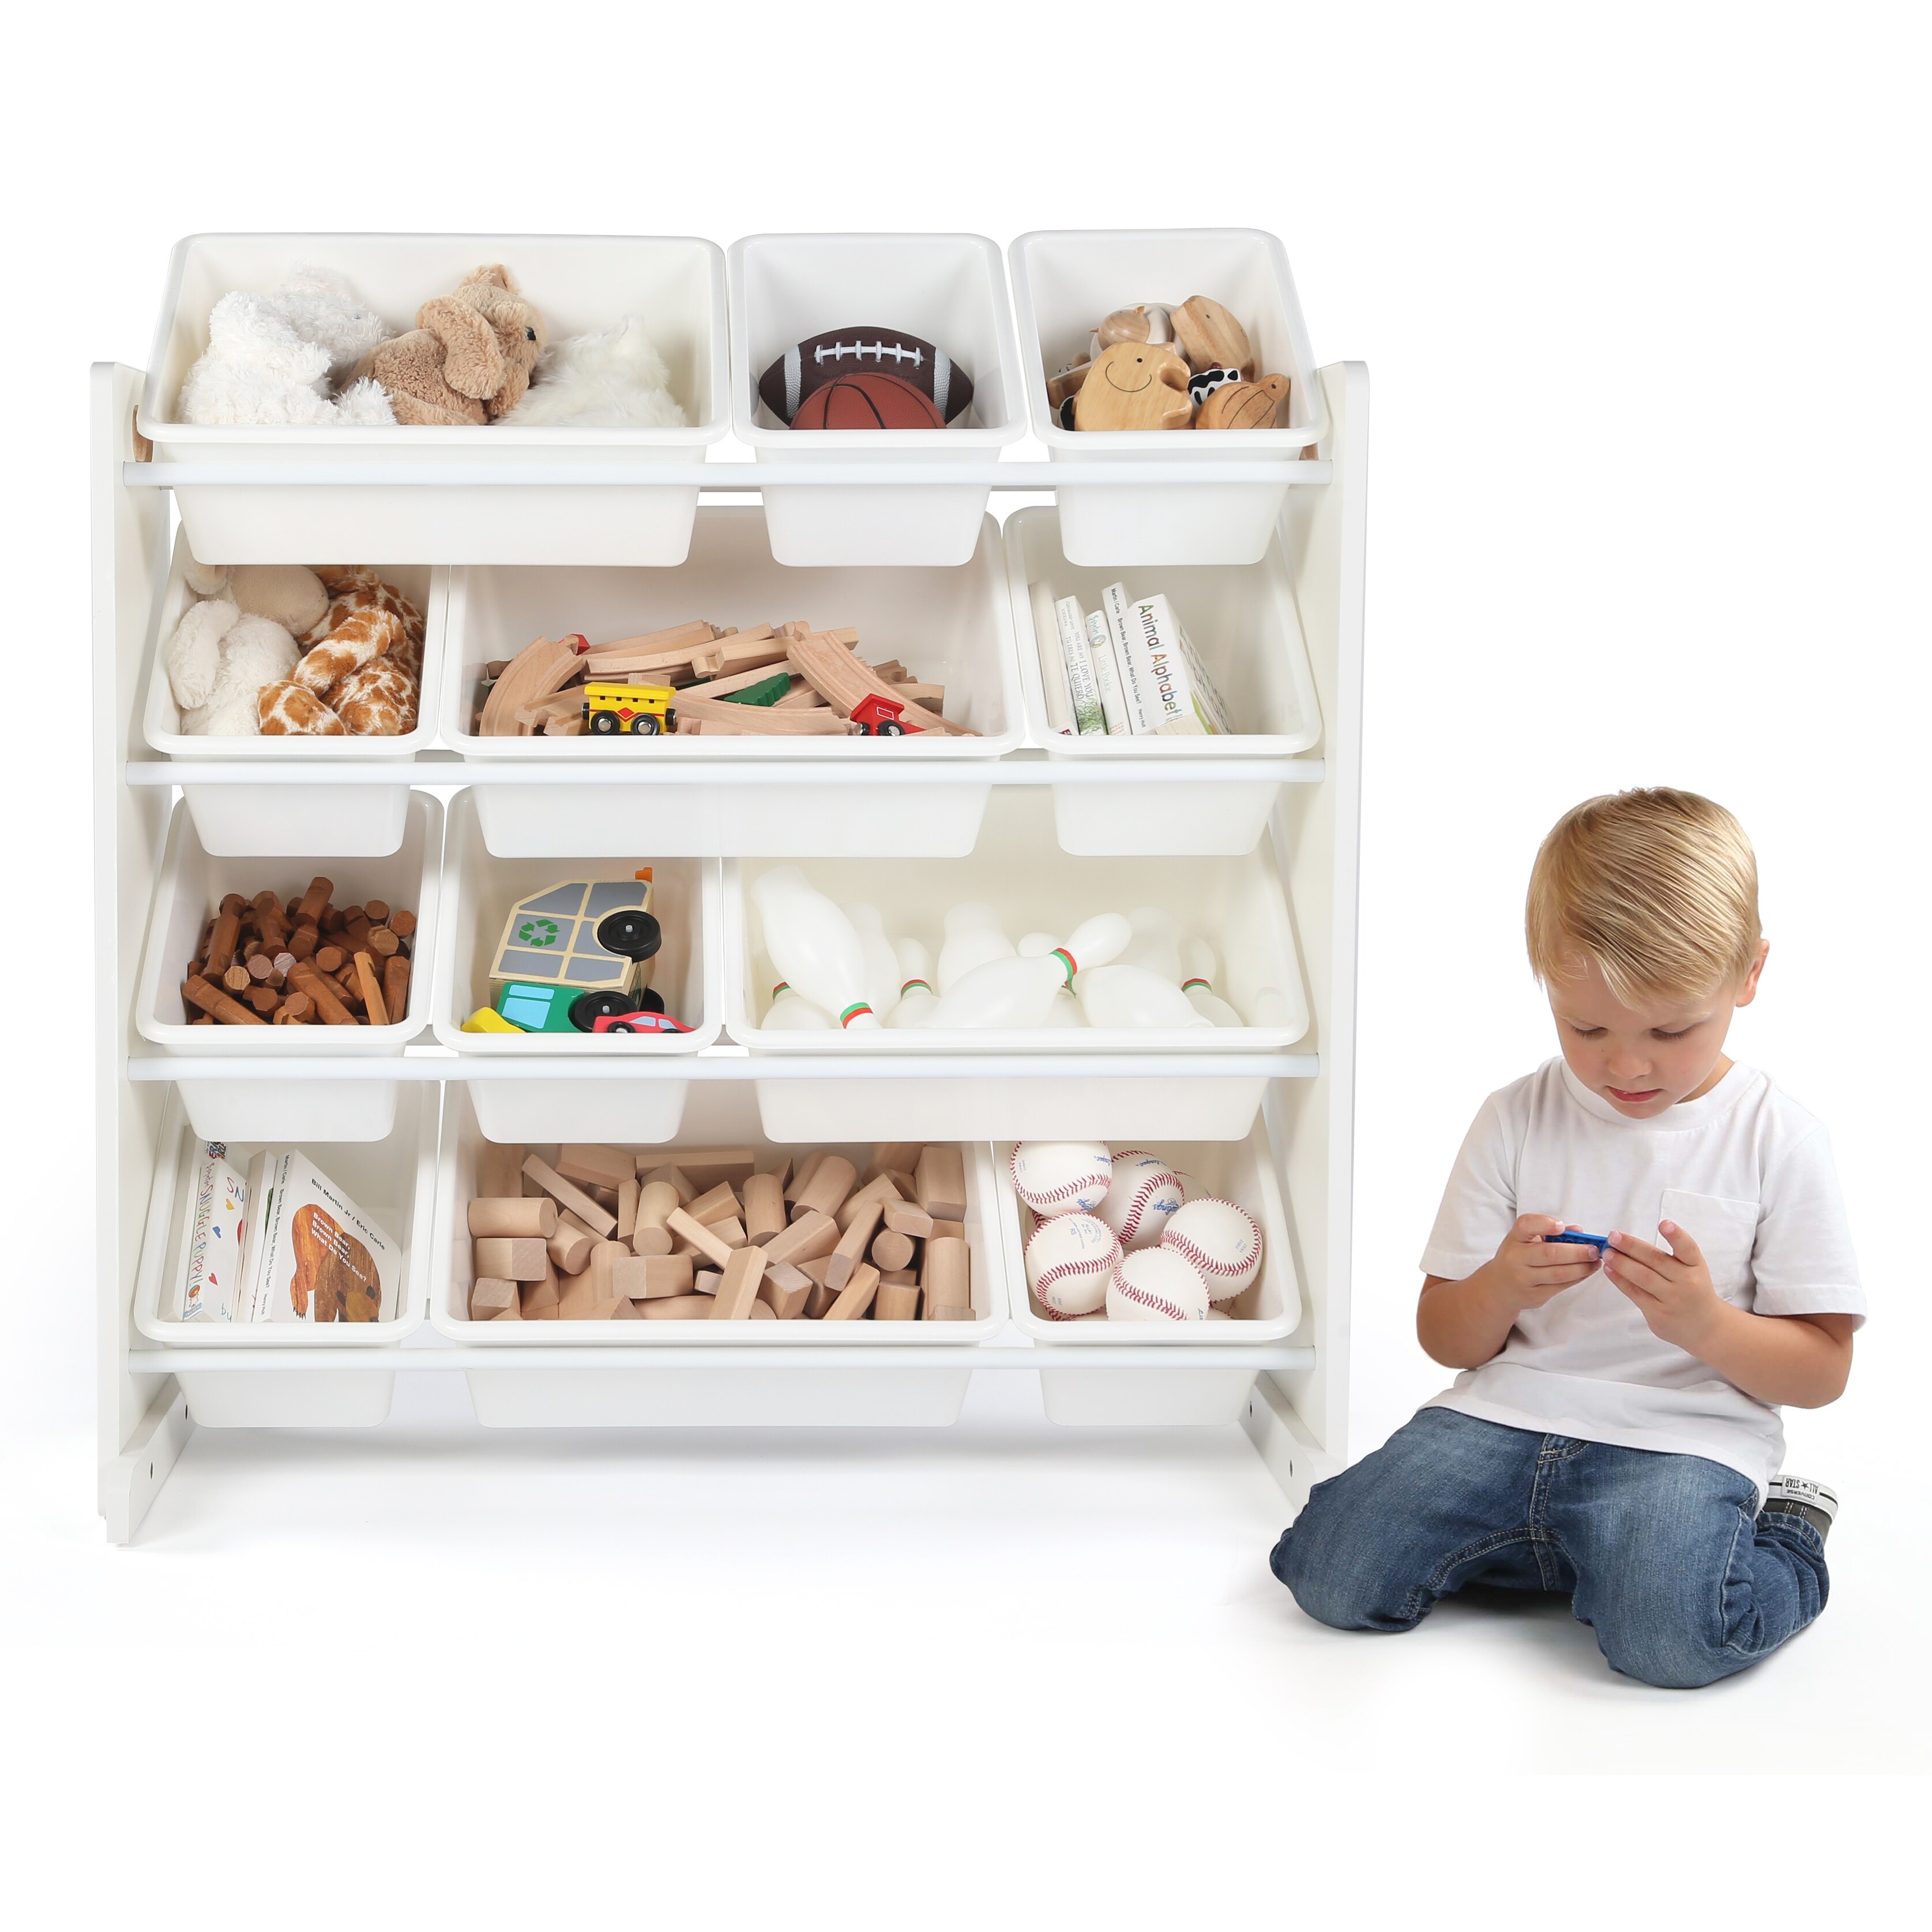 https://ak1.ostkcdn.com/images/products/is/images/direct/fa5a9f94b3216f2781deaef9f537c57b85d300d7/Humble-Crew-Cambridge-Kids%27-Toy-Storage-Organizer-with-12-Plastic-Bins%2C-White.jpg